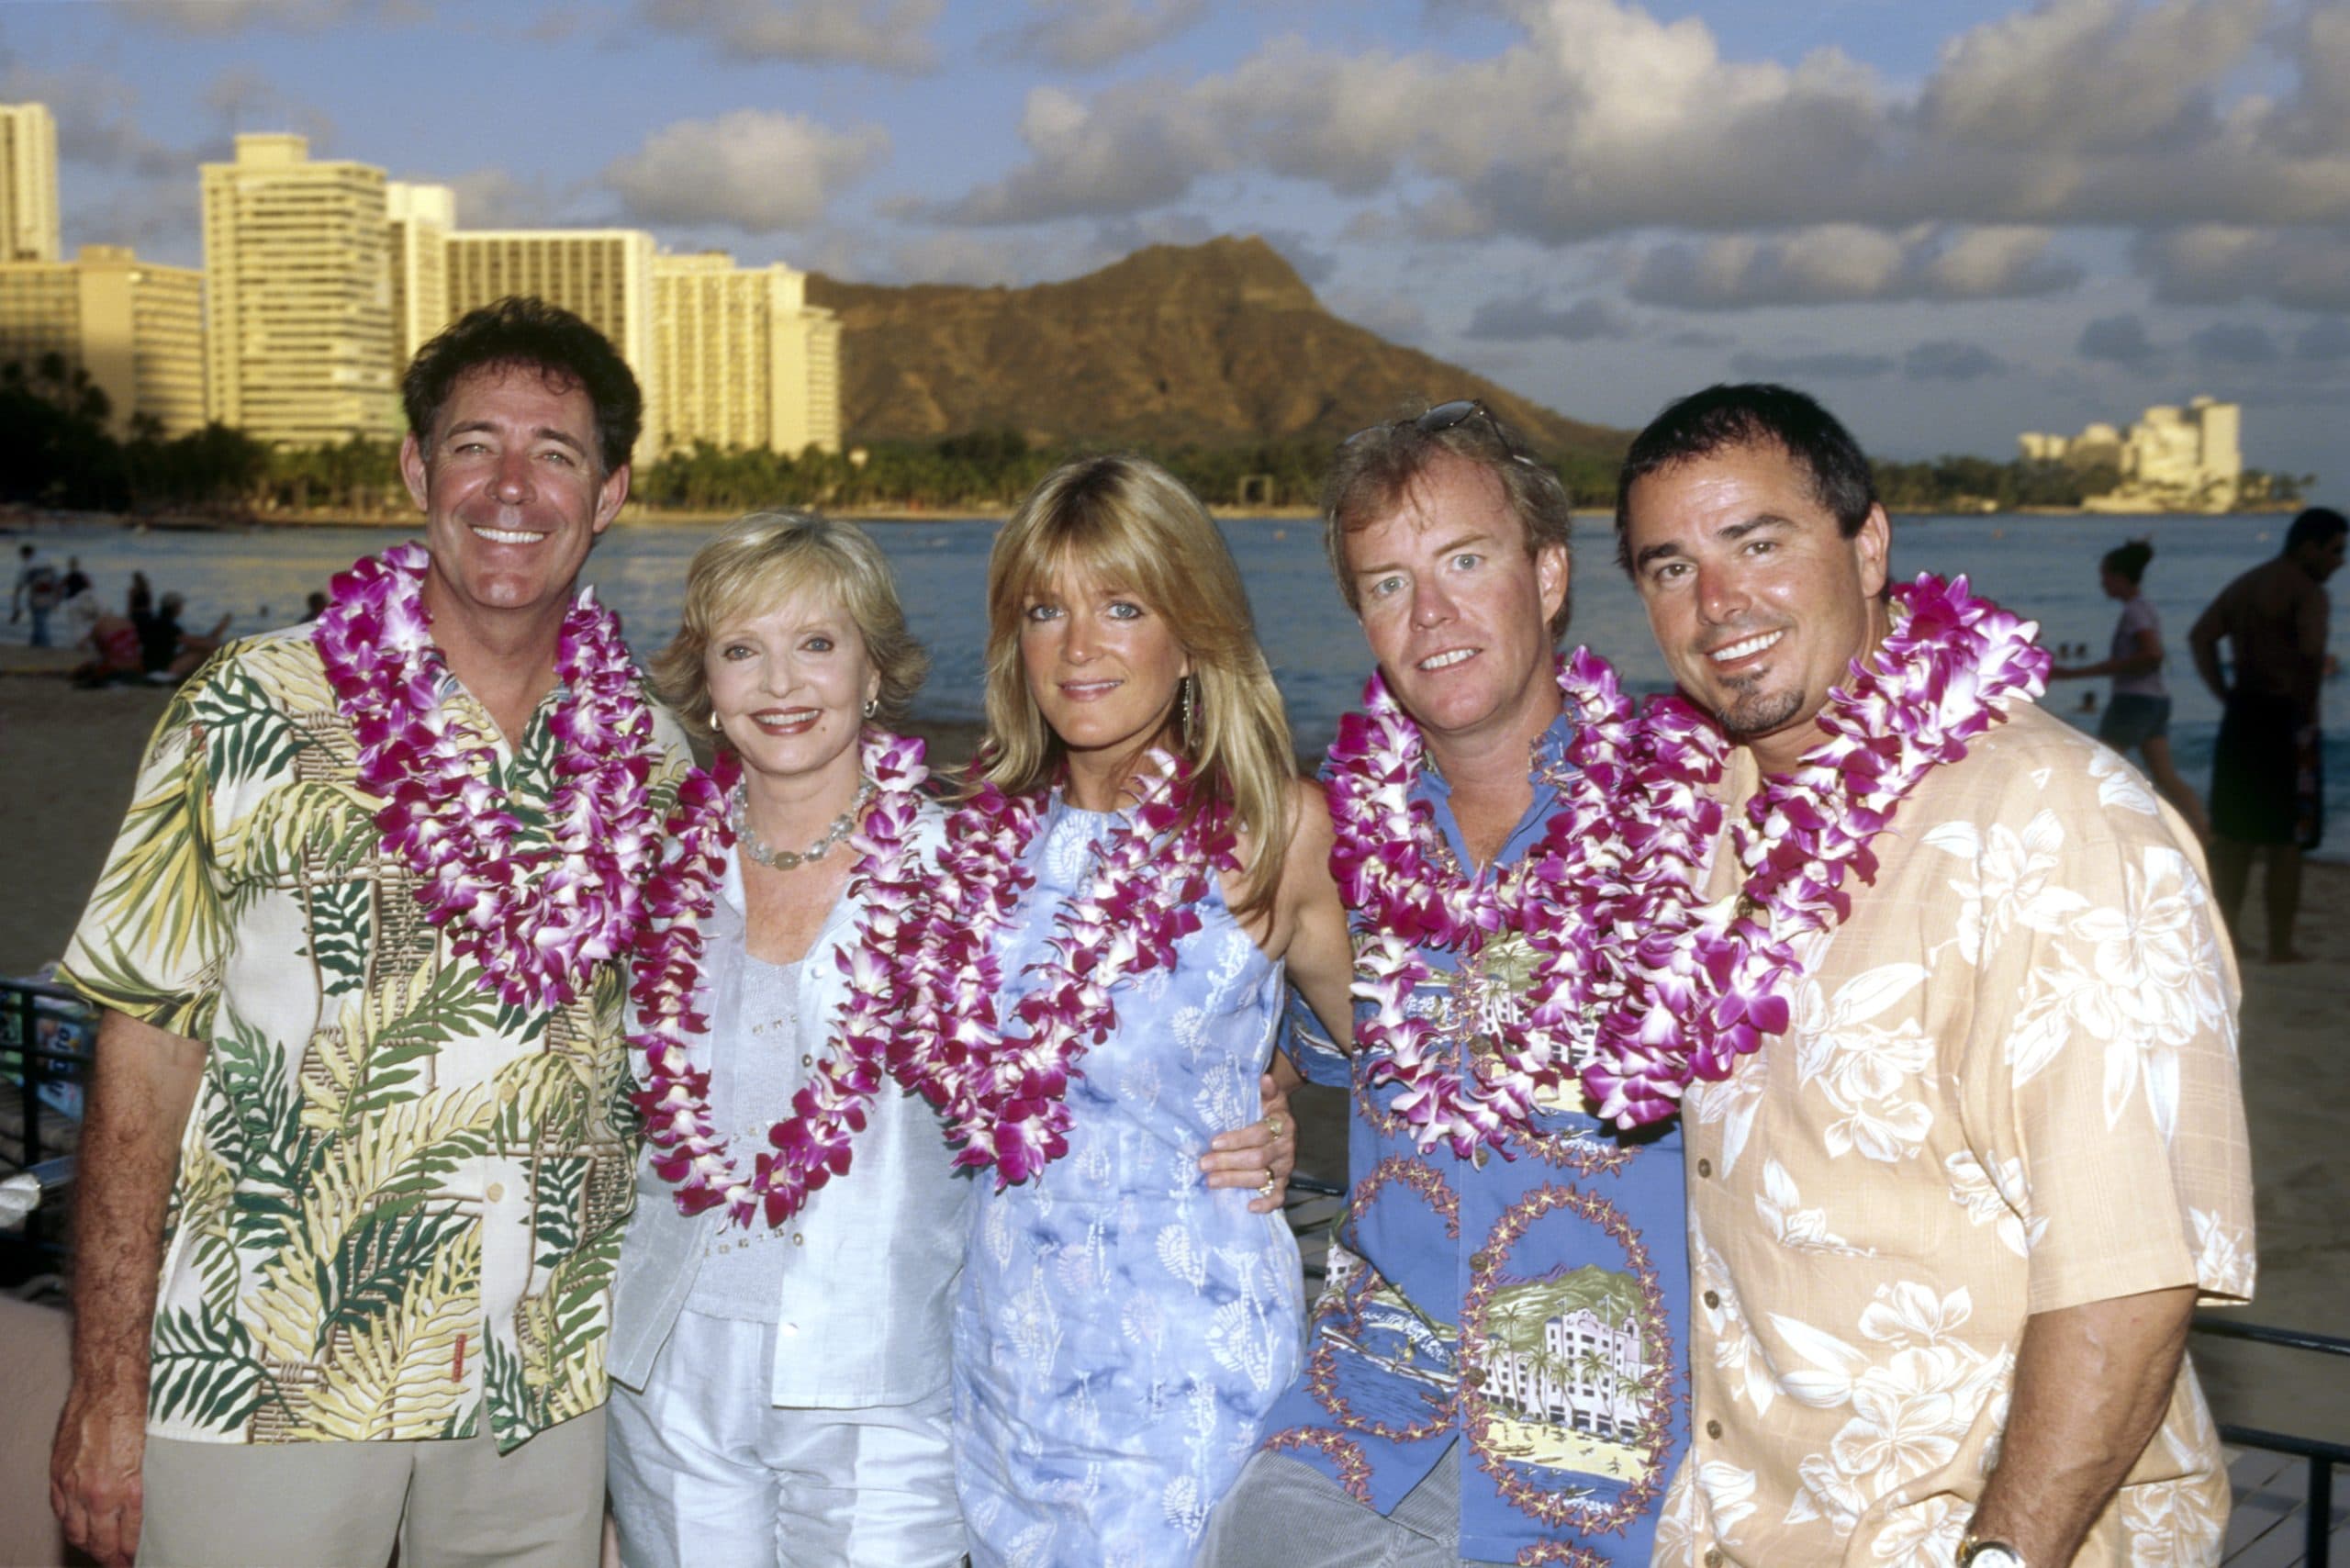 THE BRADYS BACK IN HAWAII, Barry Williams, Florence Henderson, Susan Olsen, Mike Lookinland, Christopher Knight, 2005